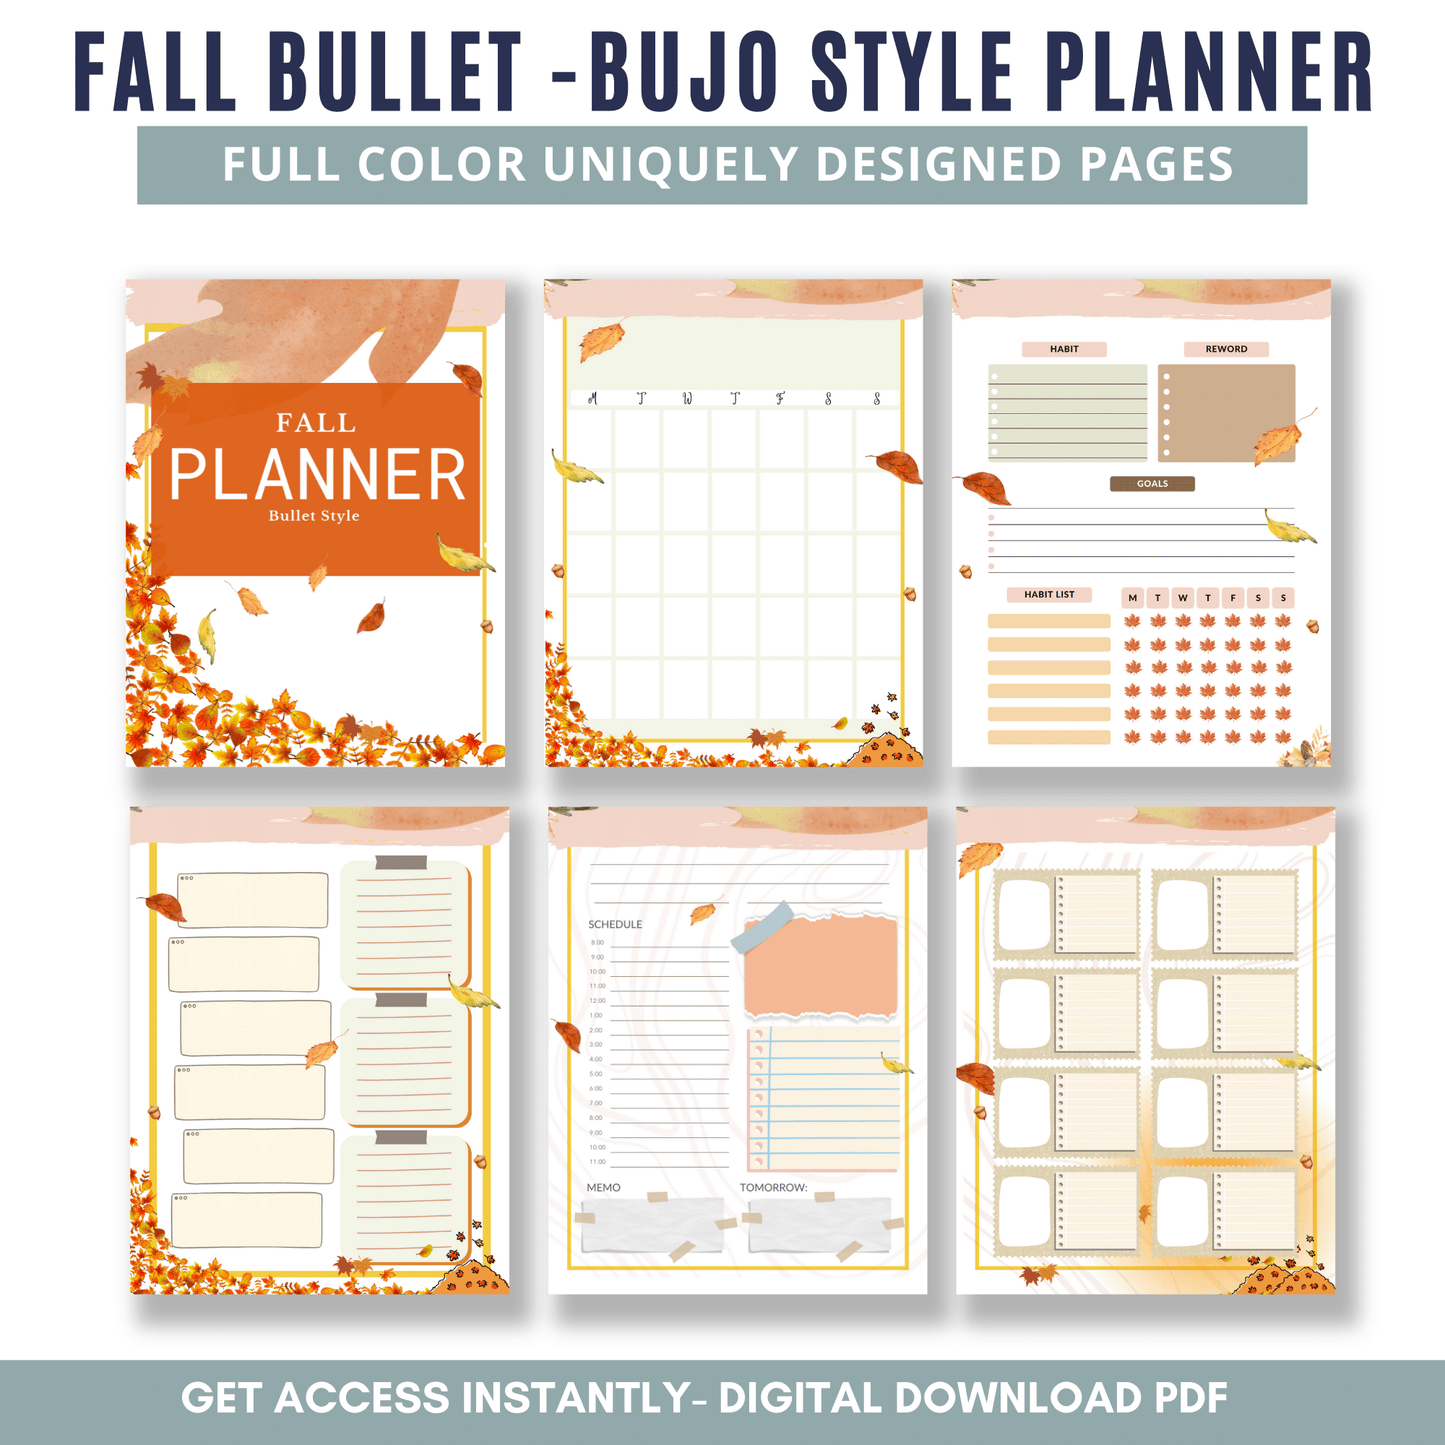 Fall Bullet Style Planner